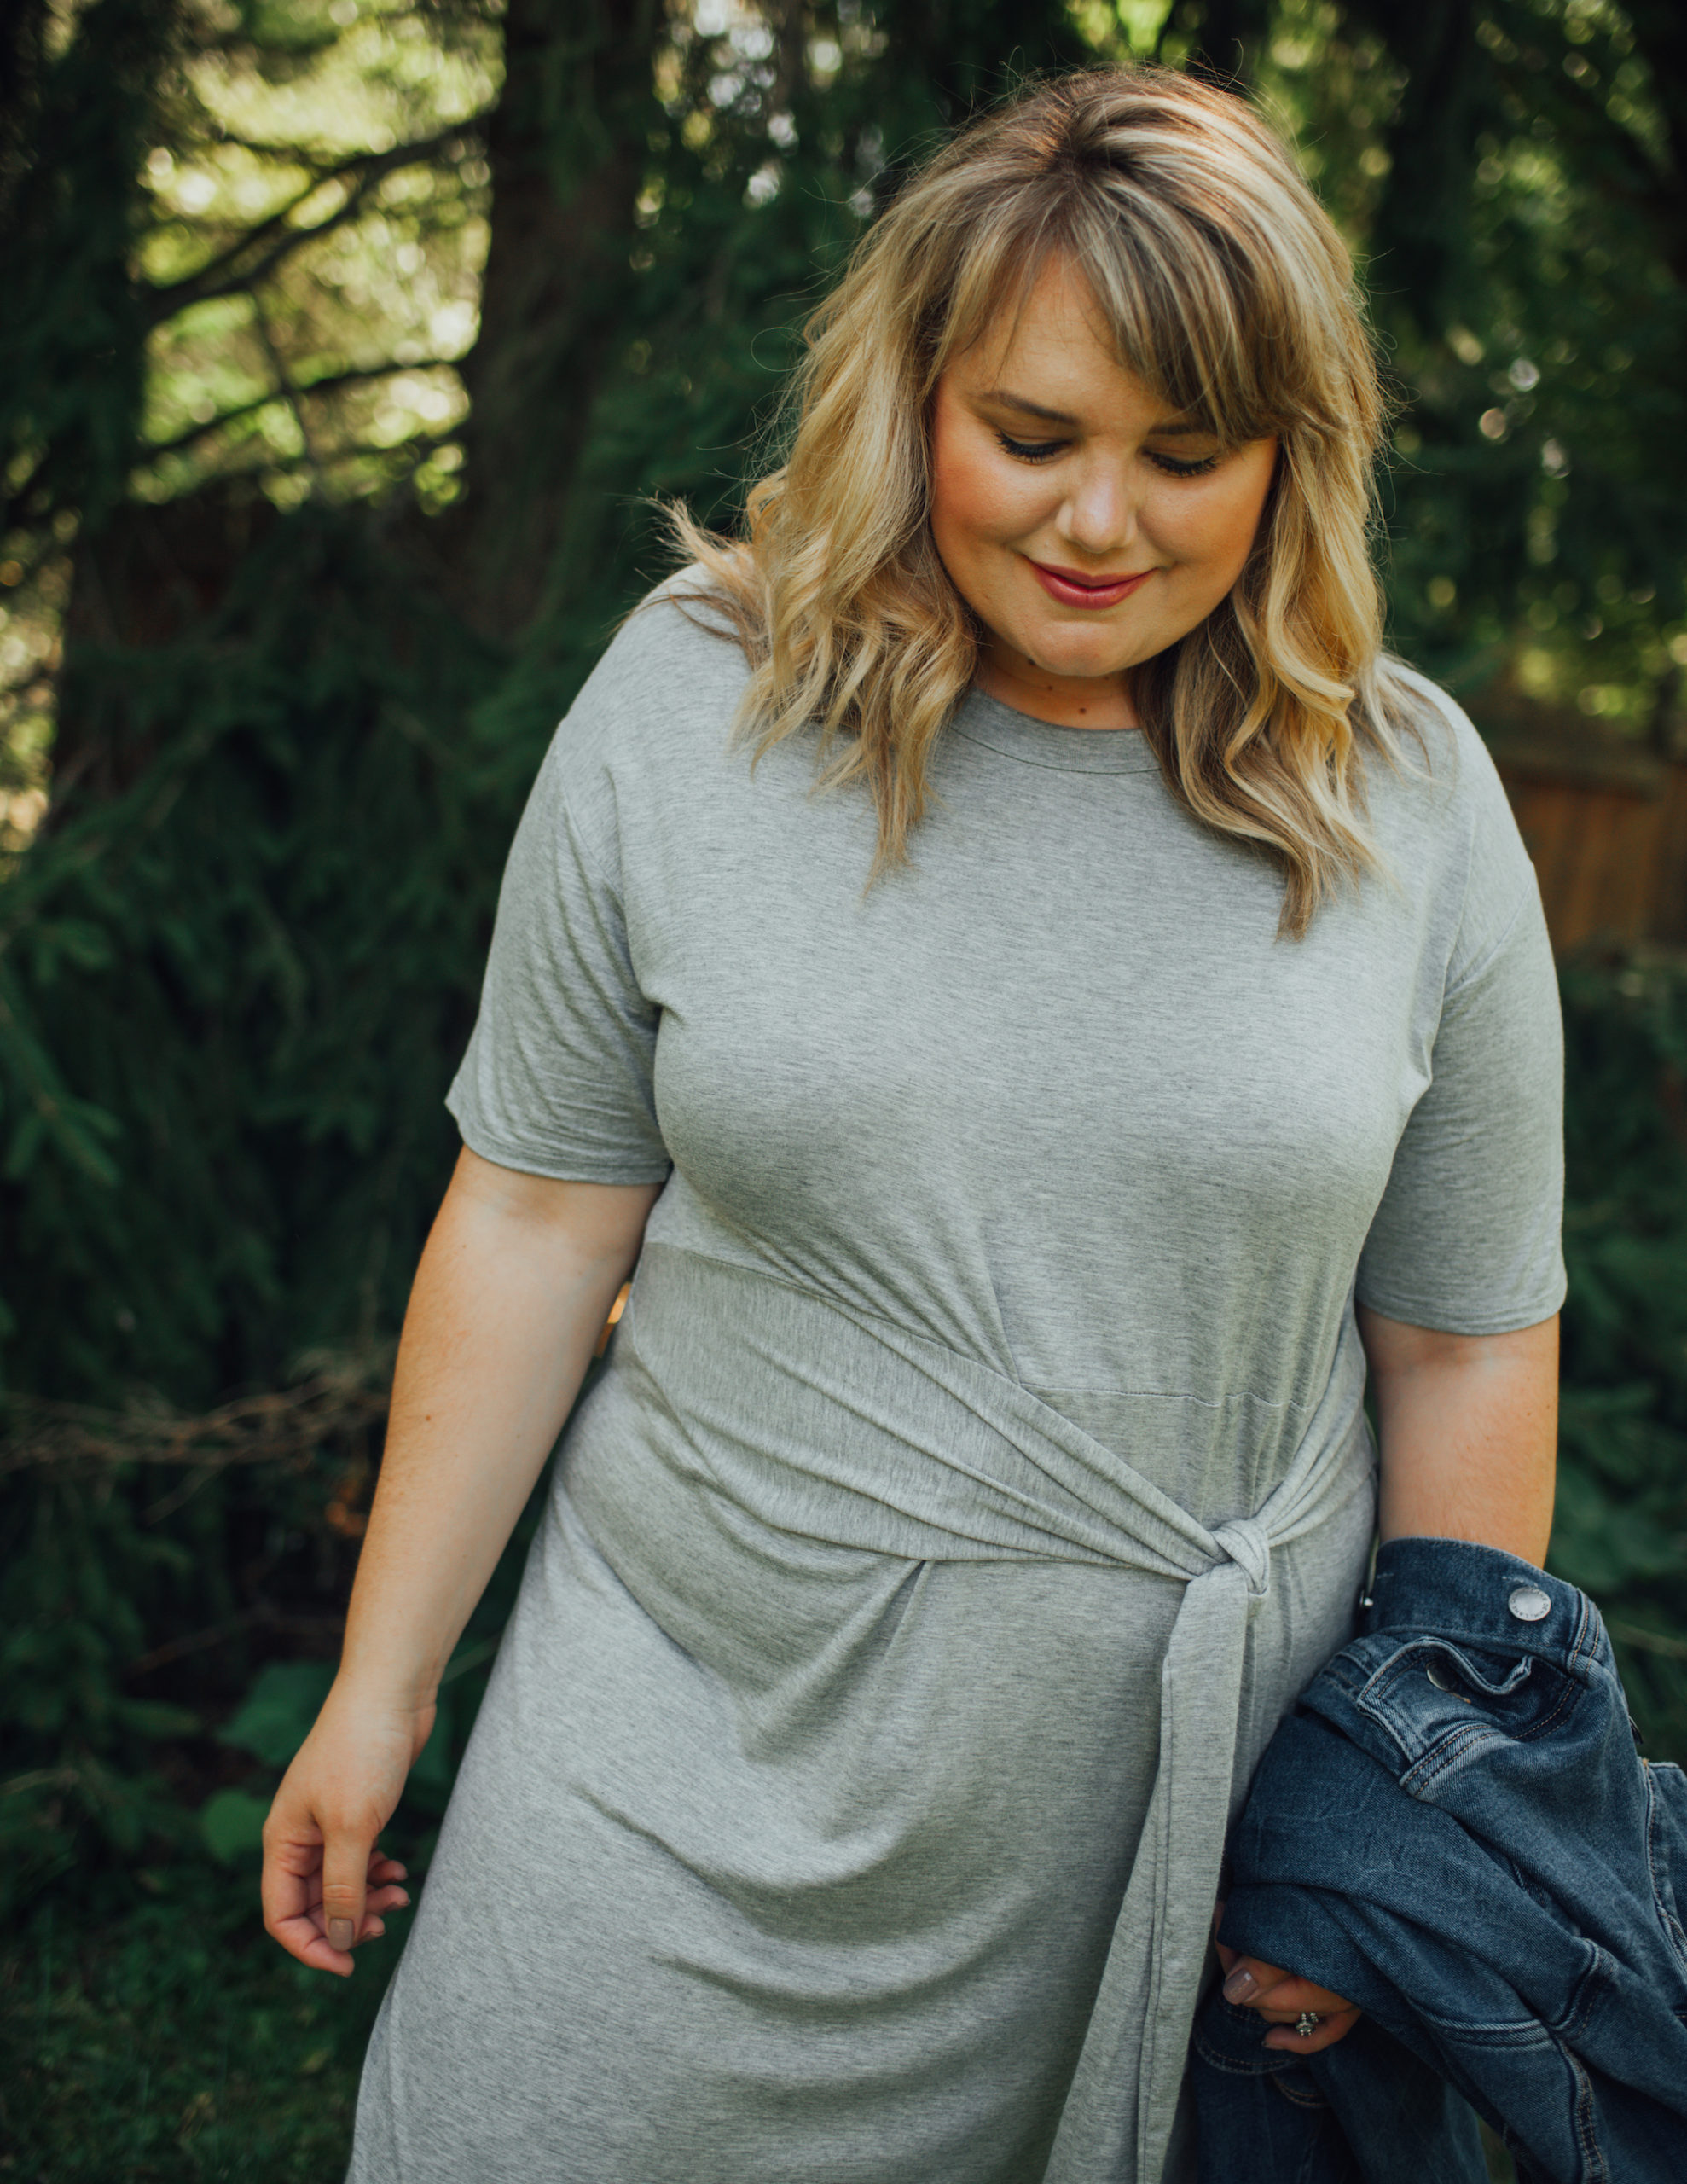 End of Summer Outfits With Chic Soul. Sharing a sporty and spice look from Chic Soul, the plus size boutique that has tons of options! 